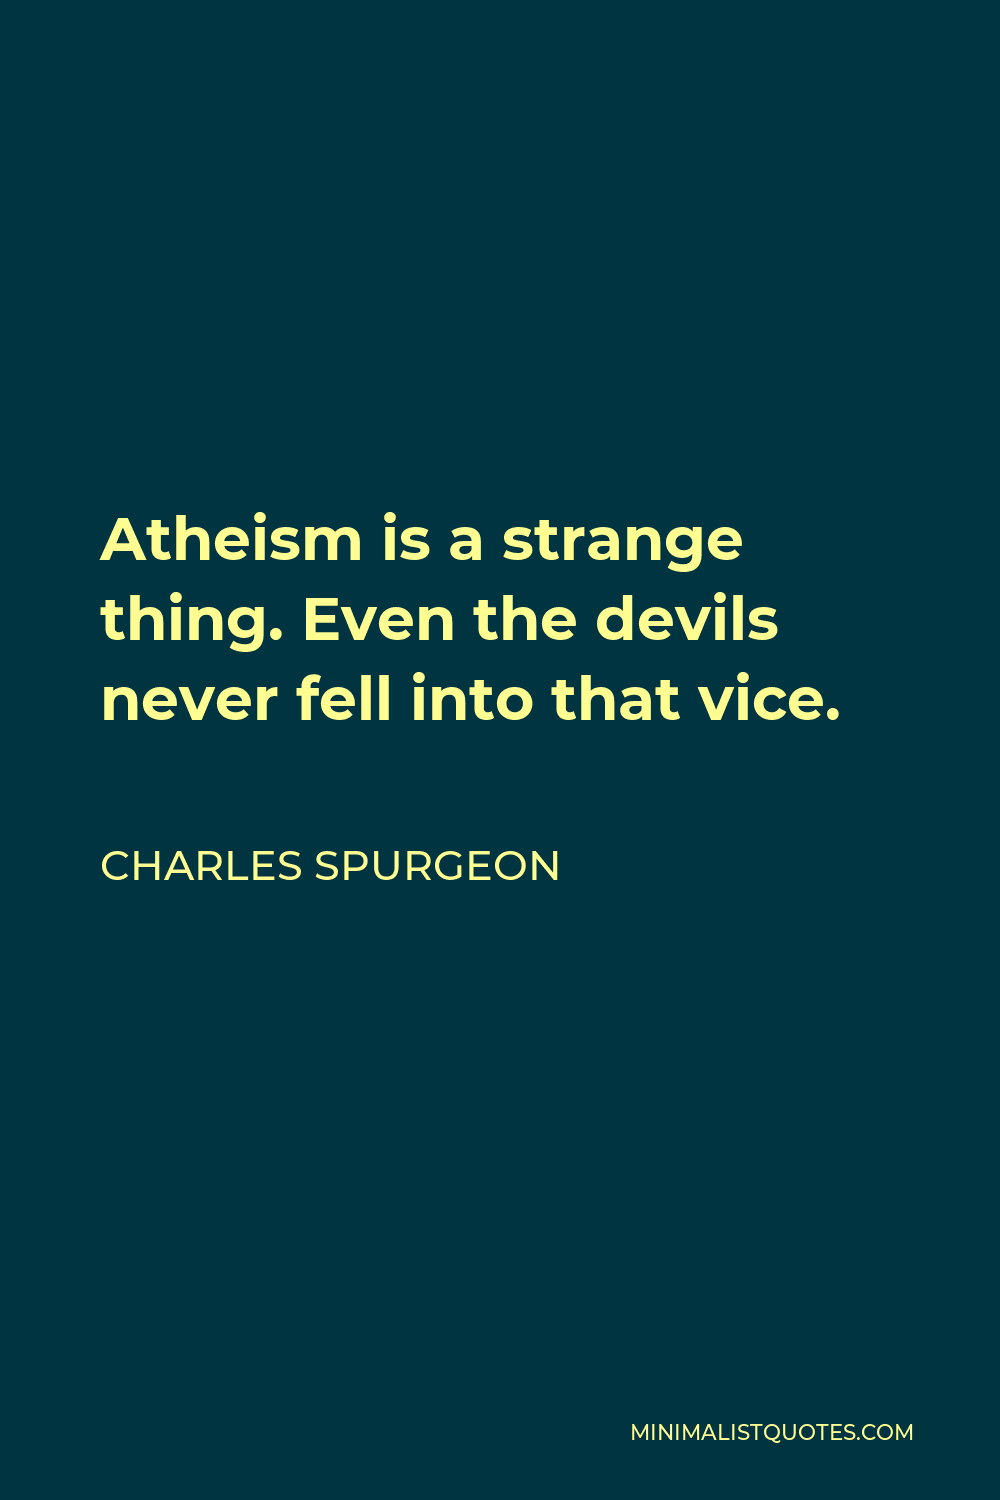 Charles Spurgeon Quote - Atheism is a strange thing. Even the devils never fell into that vice.